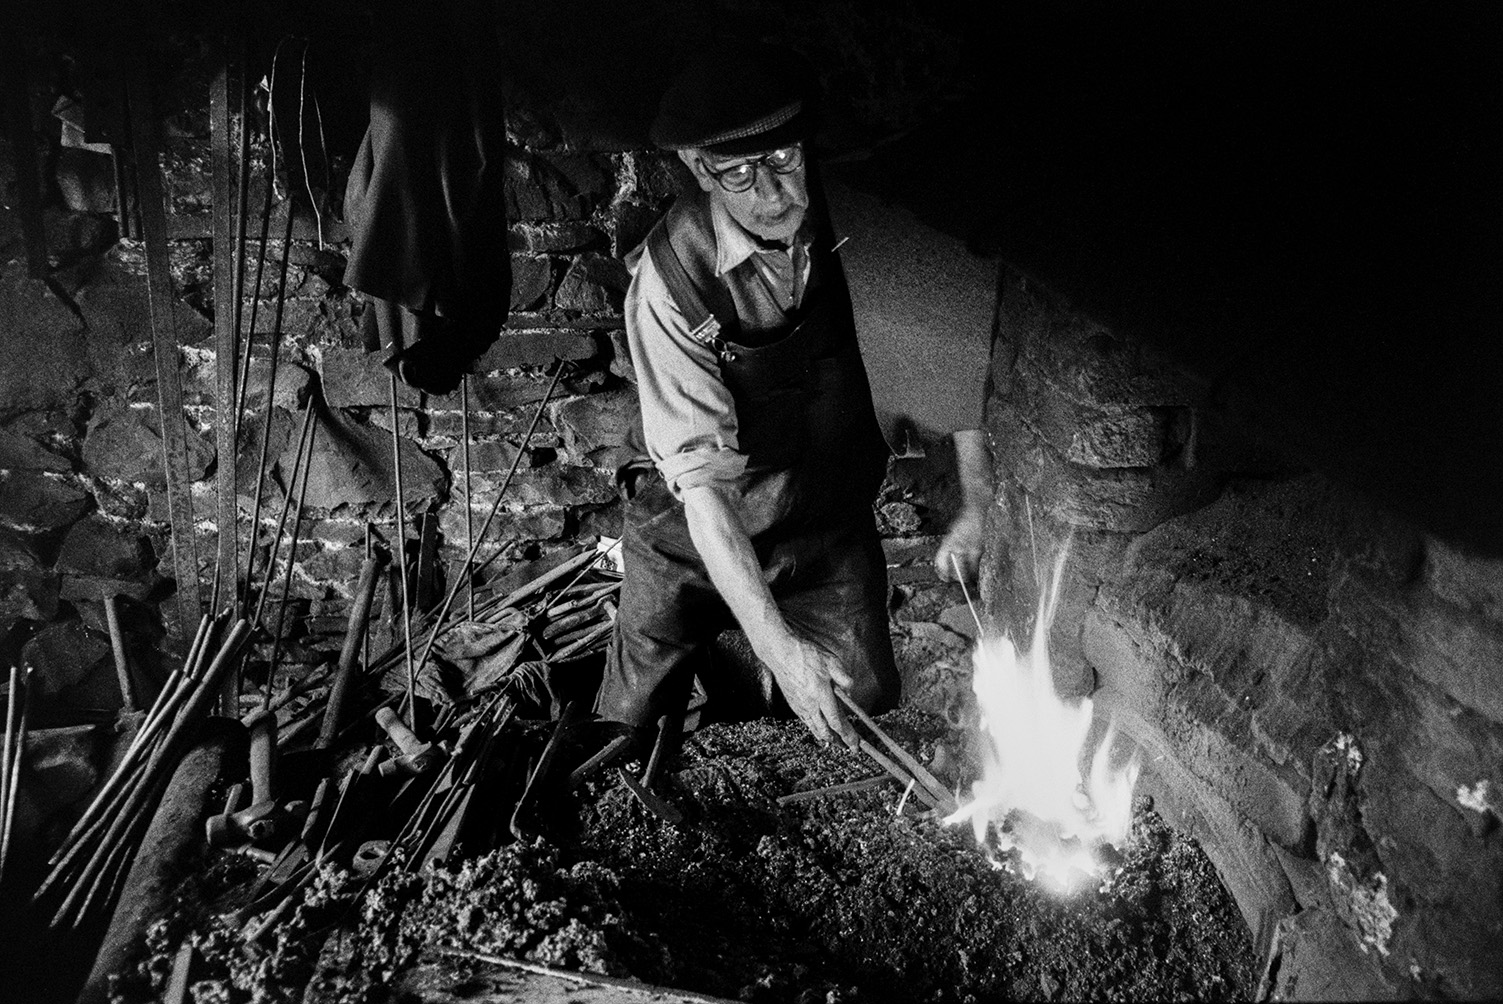 Mr Loosemore, a Blacksmith, working in his forge at Atherington to make hinges for wooden farm gates. He is holding the hinges using a pair of tongs and heating them up in a fire.